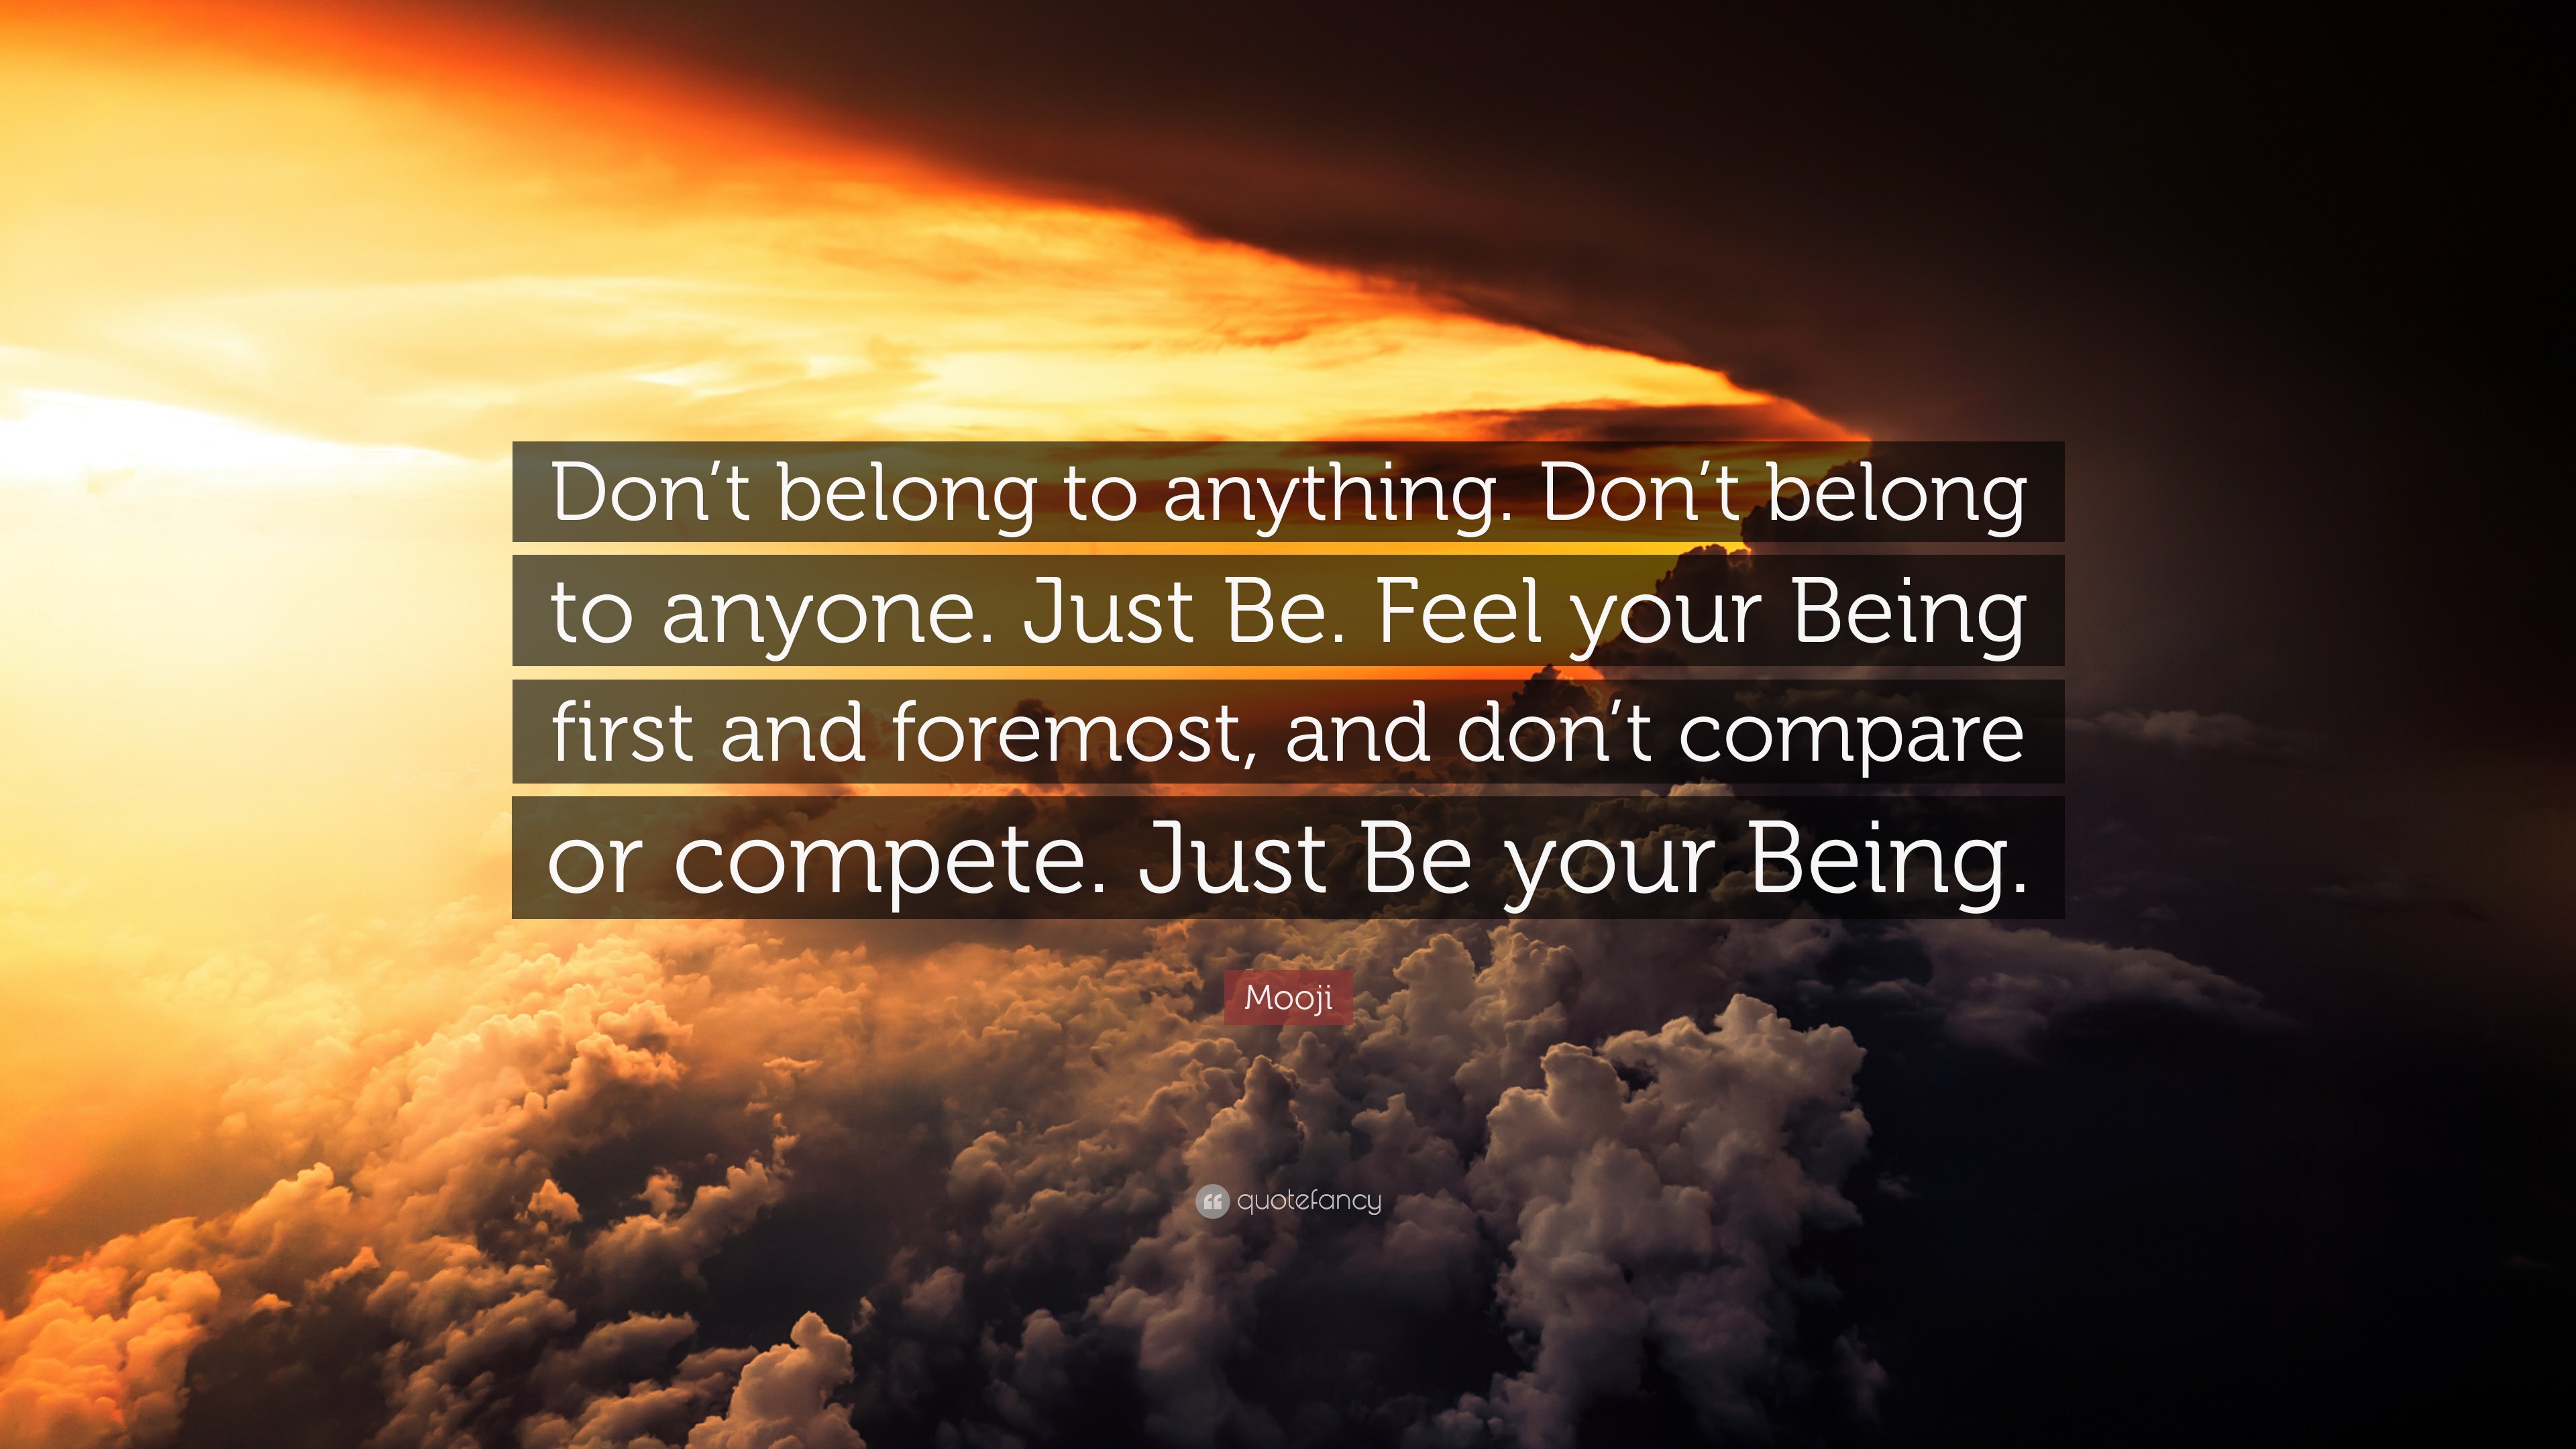 Mooji Quote: “Don’t belong to anything. Don’t belong to anyone. Just Be ...